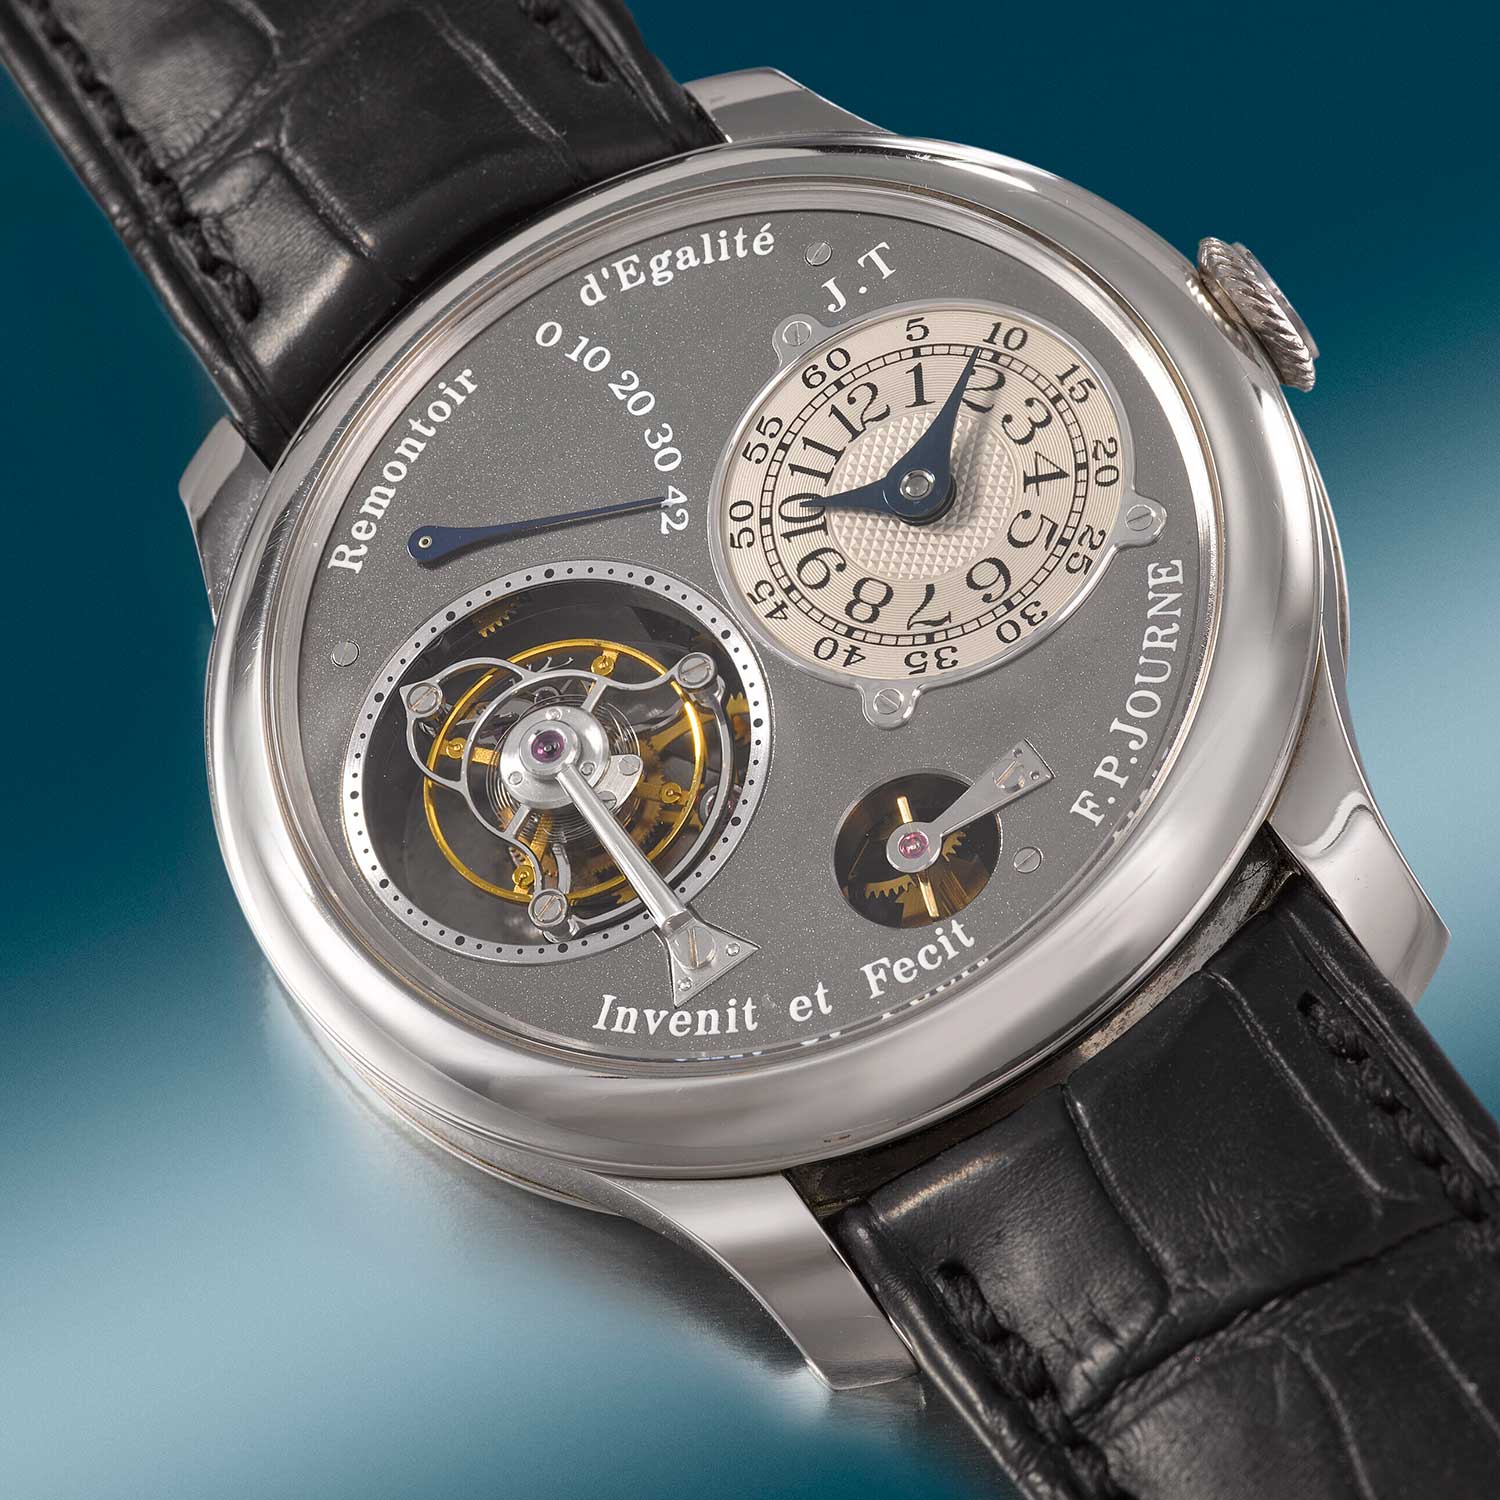 A limited-edition ruthenium example numbered 63/99-01T sold for US$1,085,731 at Christie’s Legendary and Unique Watches in November 2022, setting a record for the series (Image: Christie’s)